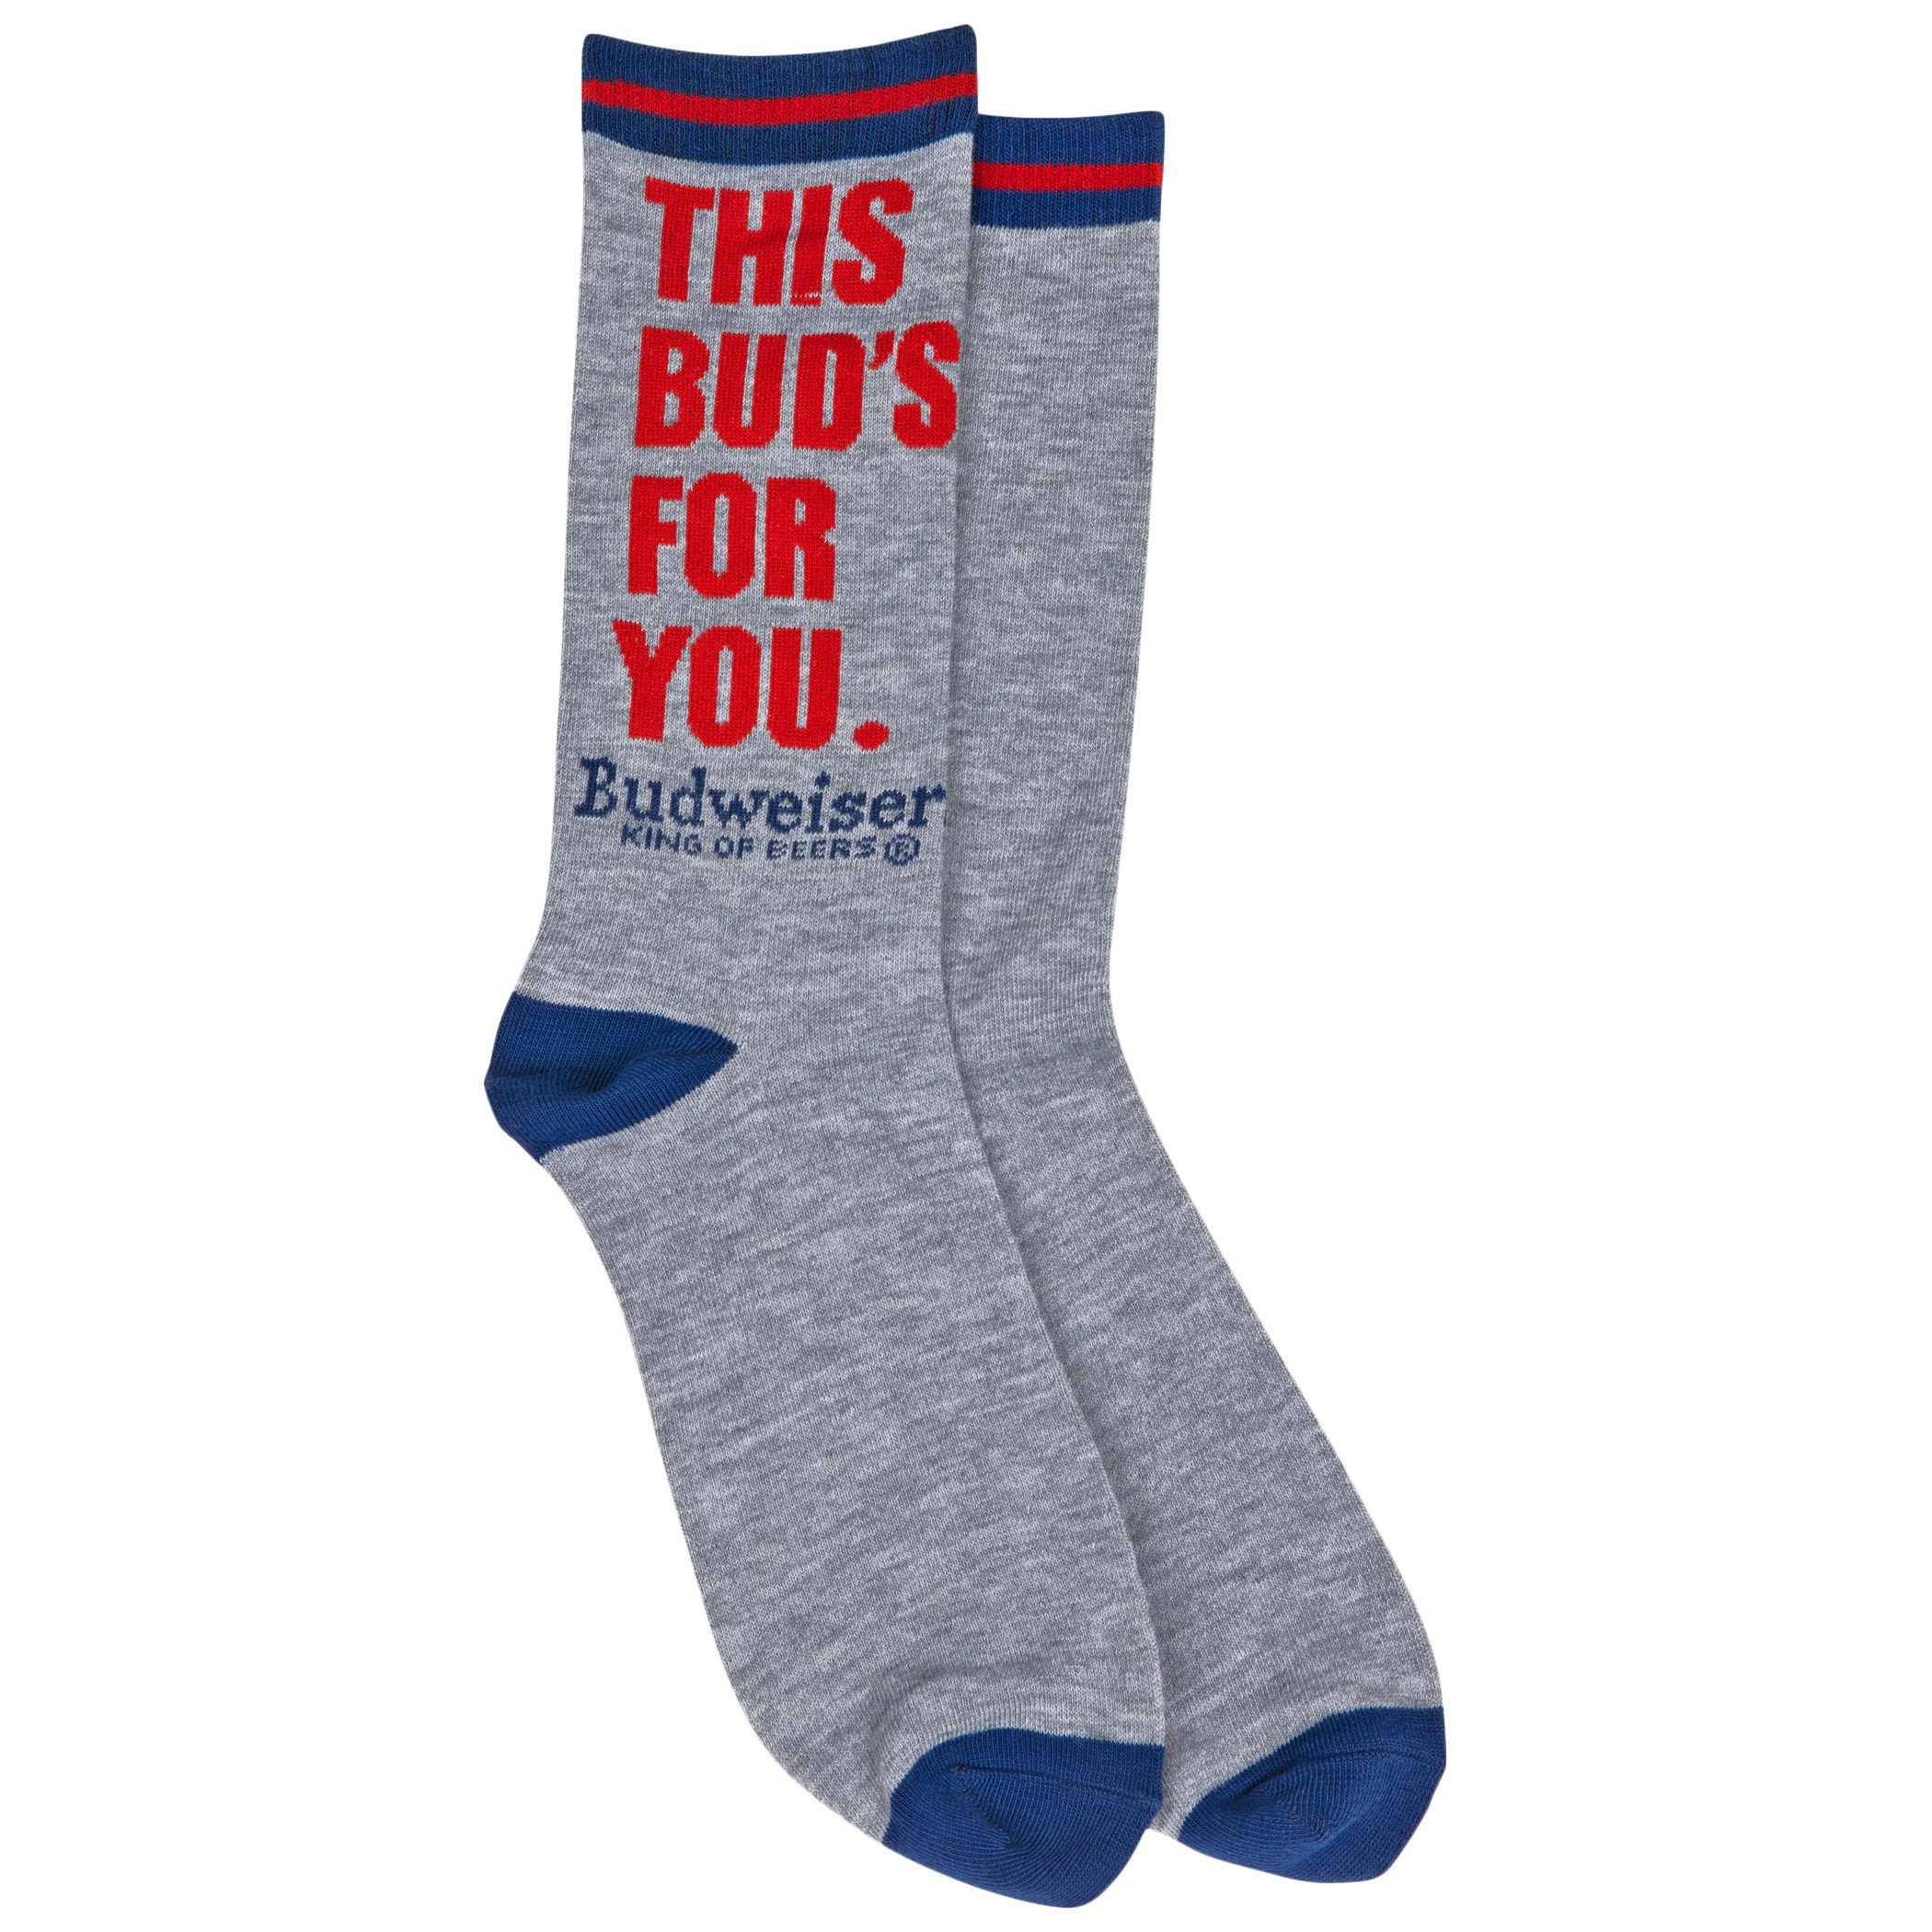 Budweiser This Bud's For You Crew Socks